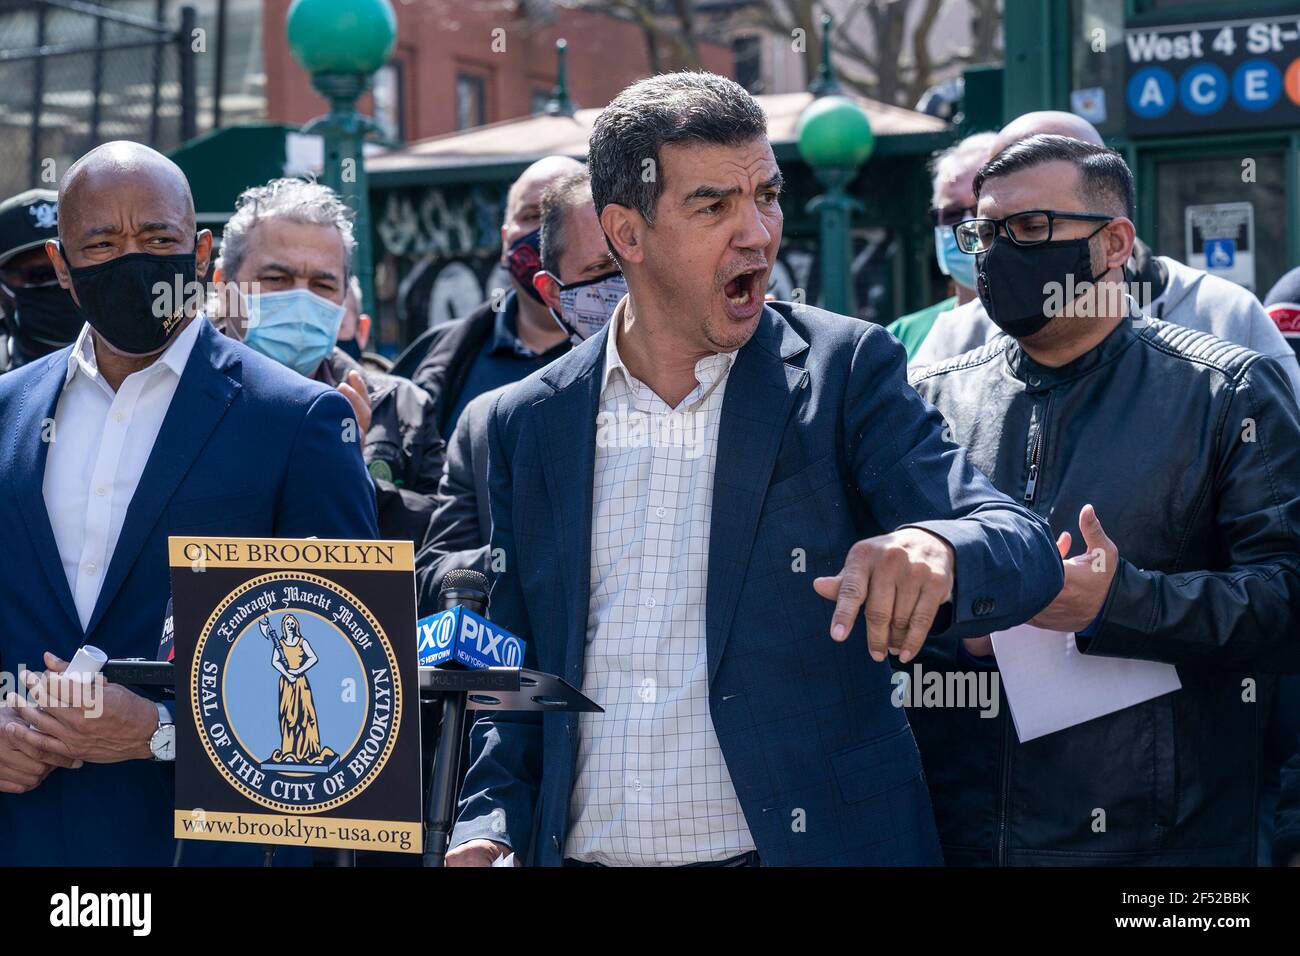 City Council member Ydanis Rodriguez speaks at a rally at the West 4th Street Station to demand restoration of service C and F lines to pre-pandemic levels. TWU Local 100 officers and members were joined by Brooklyn Borough President Eric Adams who is running for the mayor, council members Brad Lander and Ydanis Rodriguez who is the Chair of the City Council Transportation Committee. The political leaders also endorsed the union's class action lawsuit to block MTA any future service cuts. (Photo by Lev Radin/Pacific Press) Stock Photo